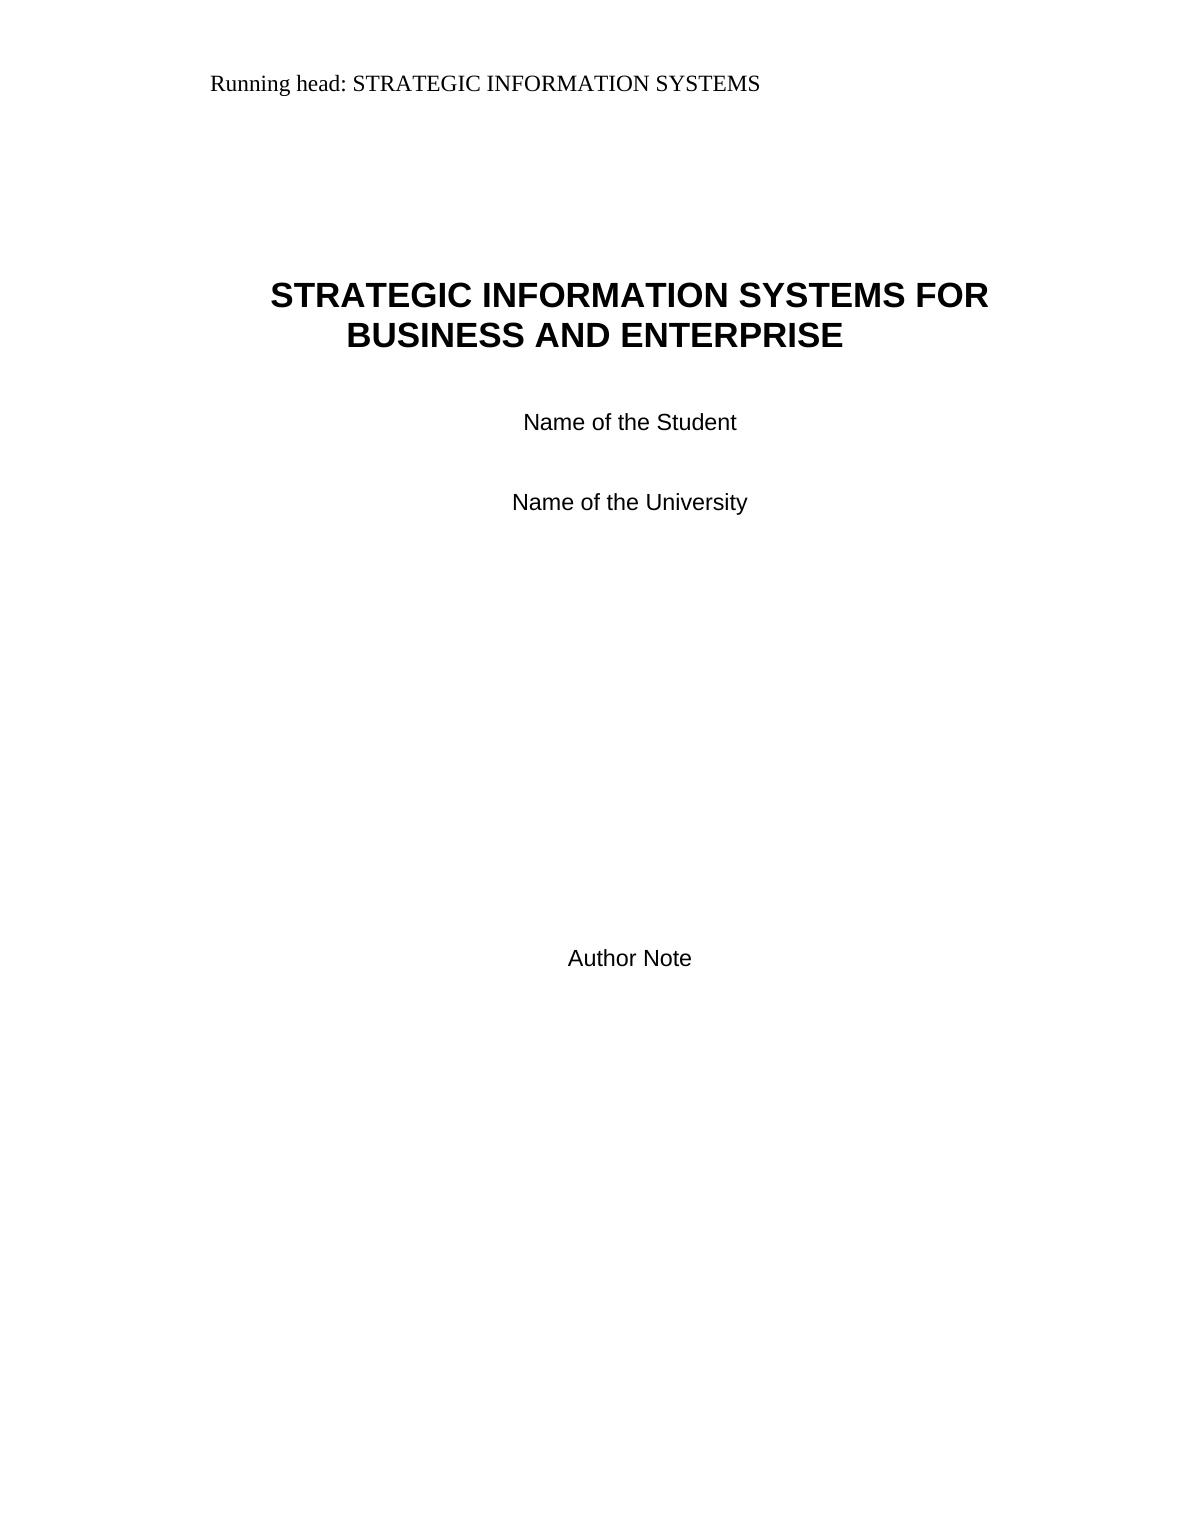 Strategic Information Systems for Business and Enterprise_1